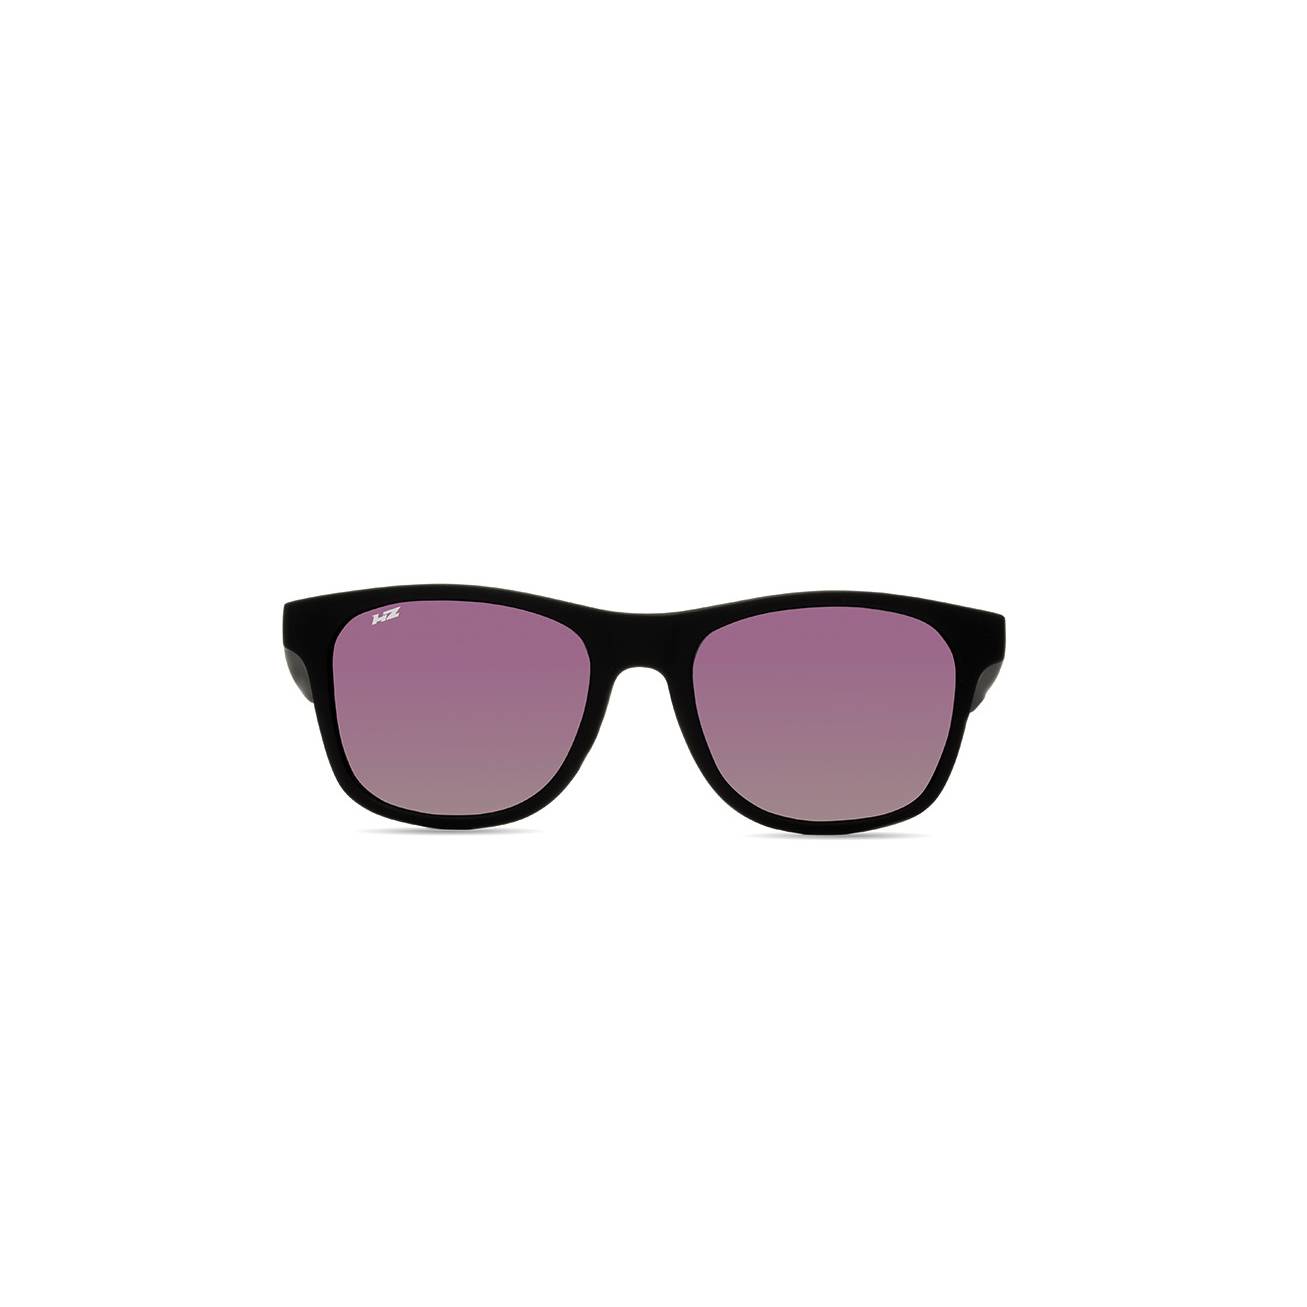 HZ Walker SE-600300-HZ sports glasses with purple-toned mirrored lenses